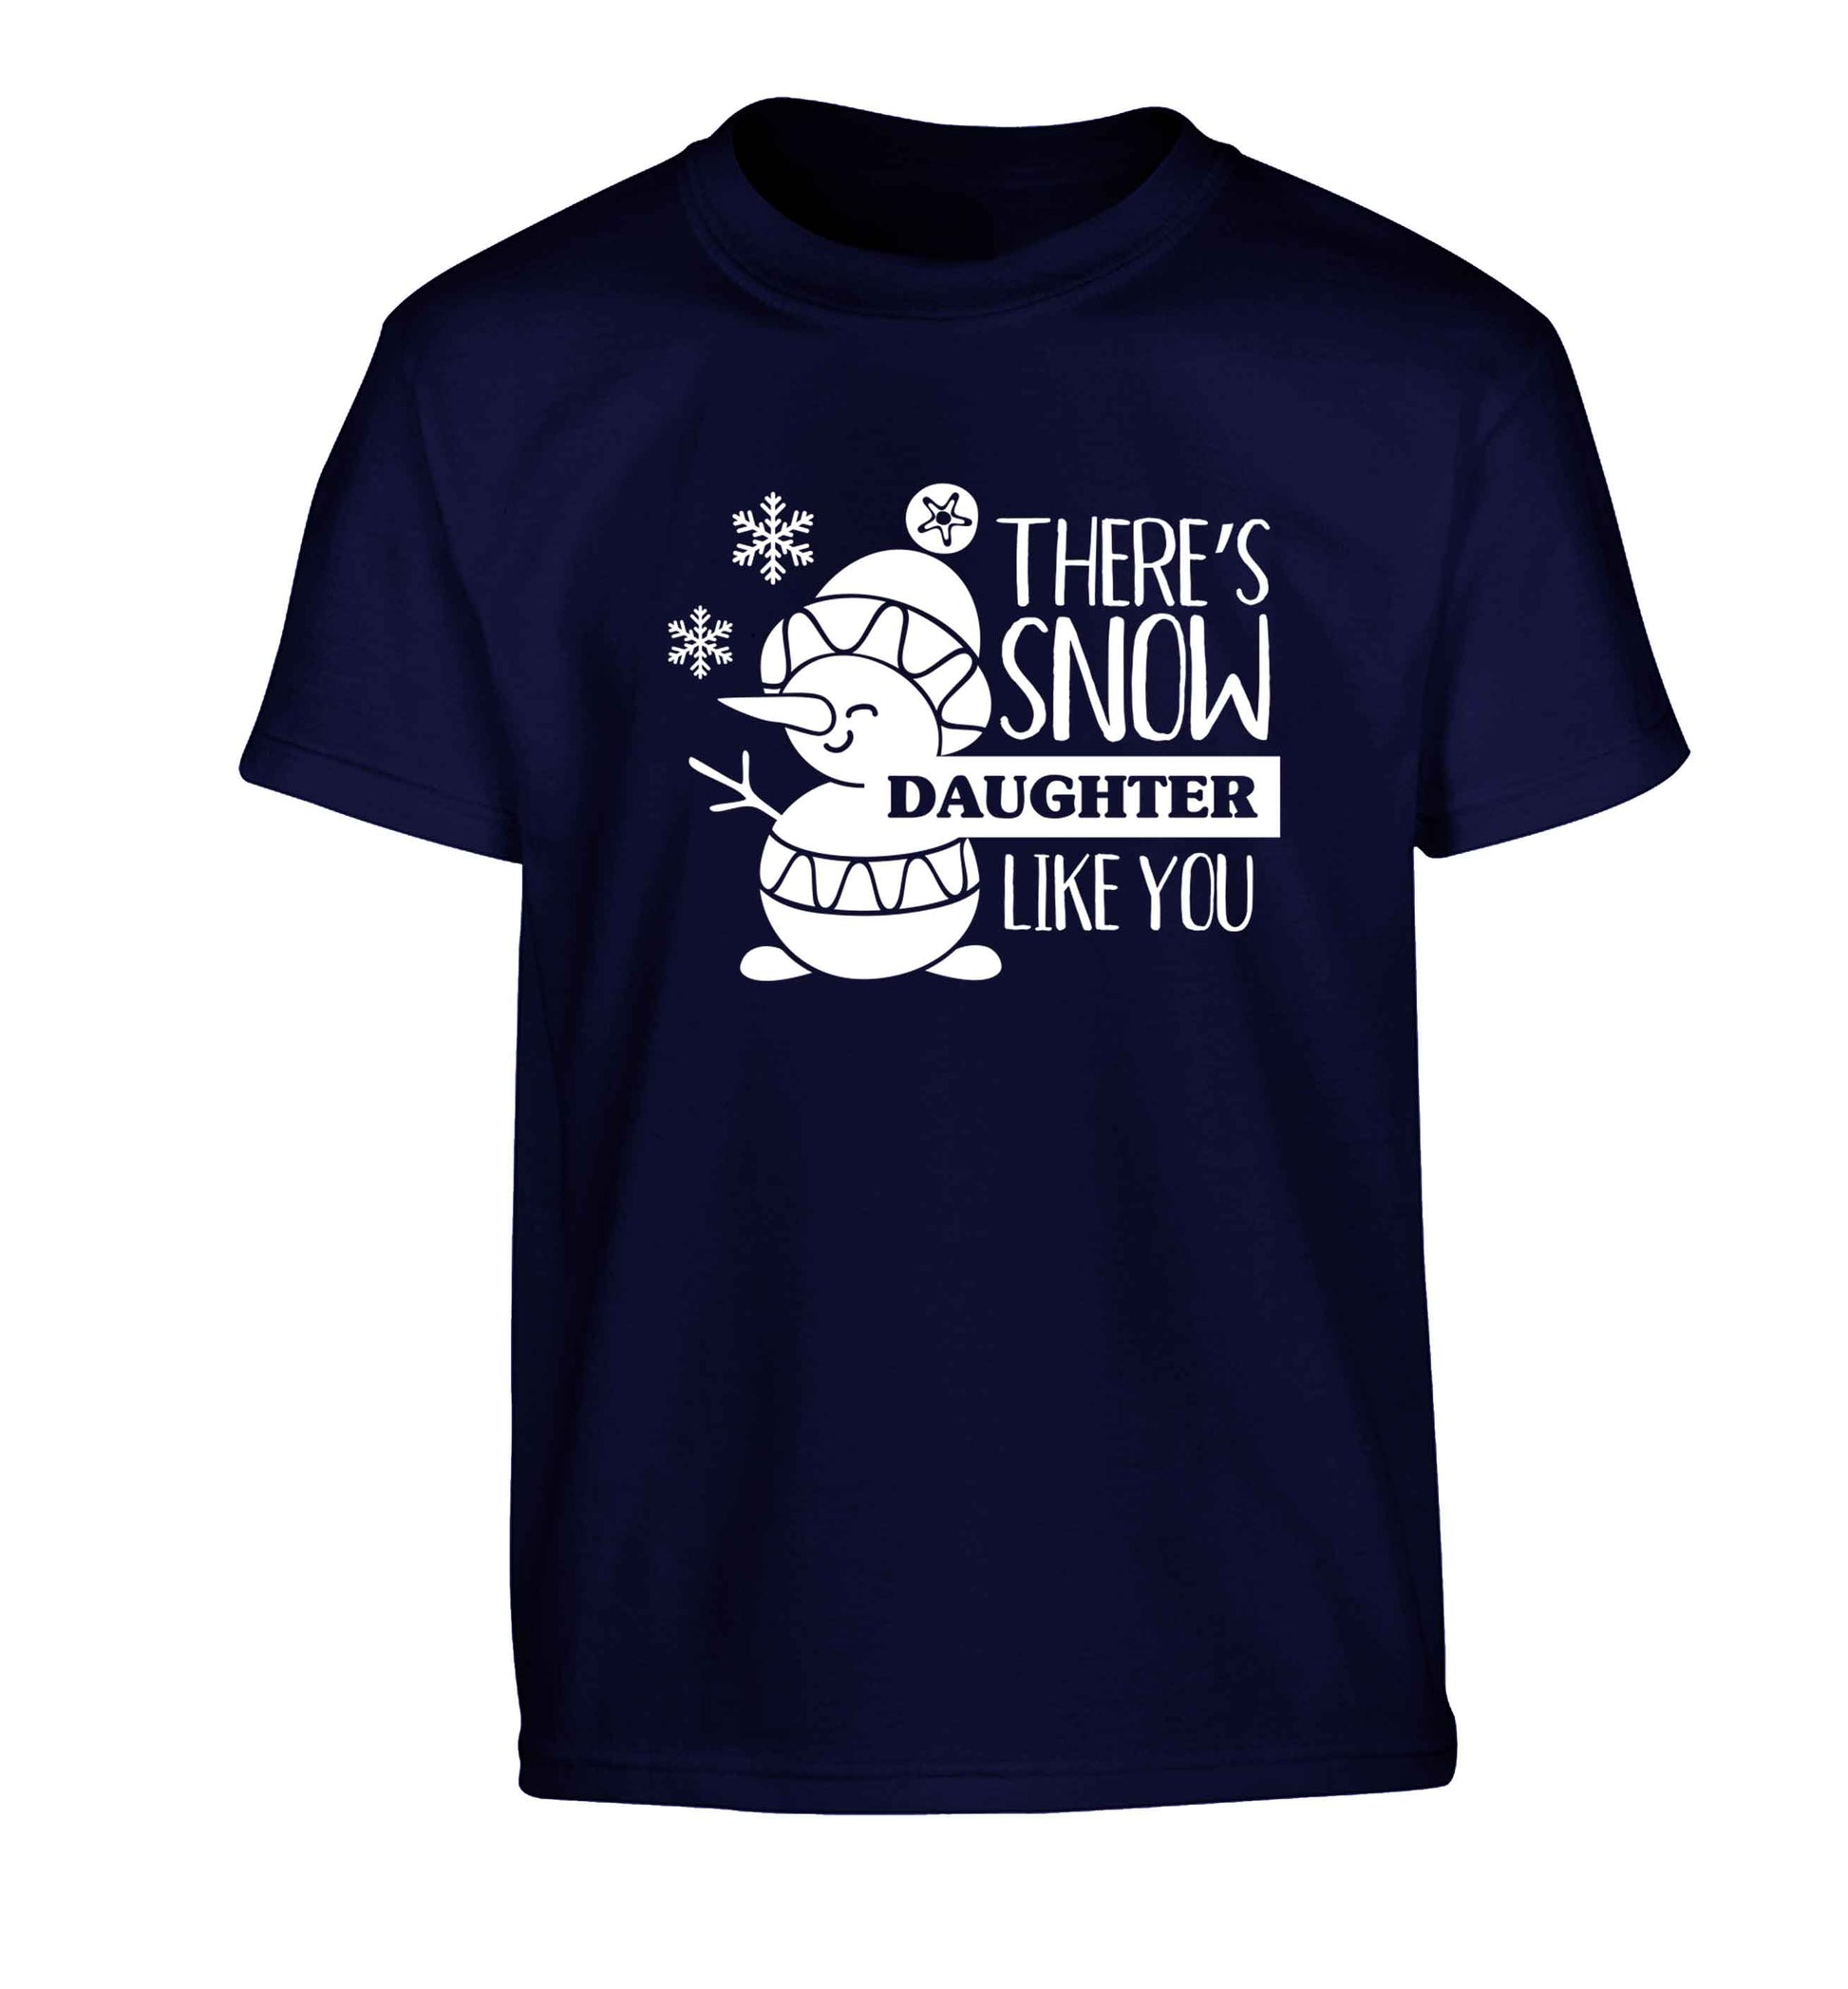 There's snow daughter like you Children's navy Tshirt 12-13 Years